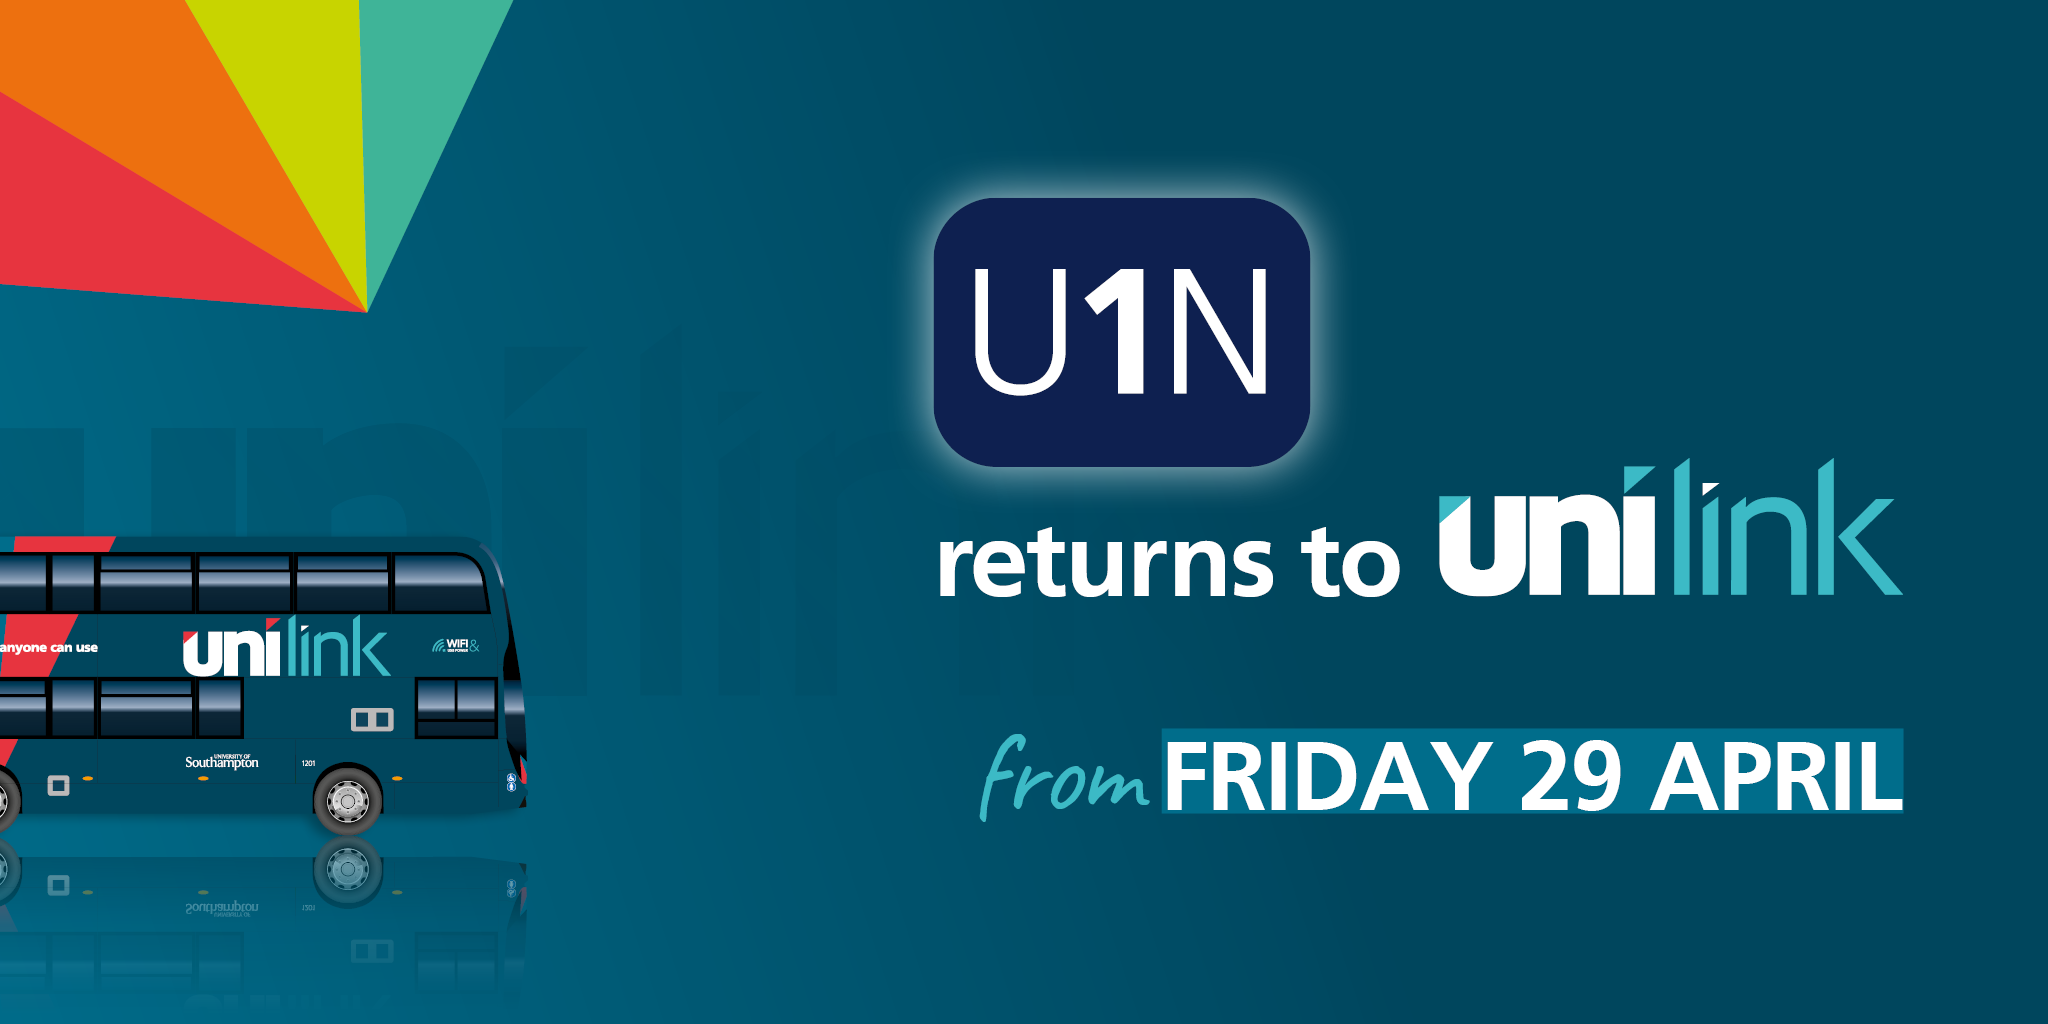 The U1N returns to Unilink from Friday 29th April